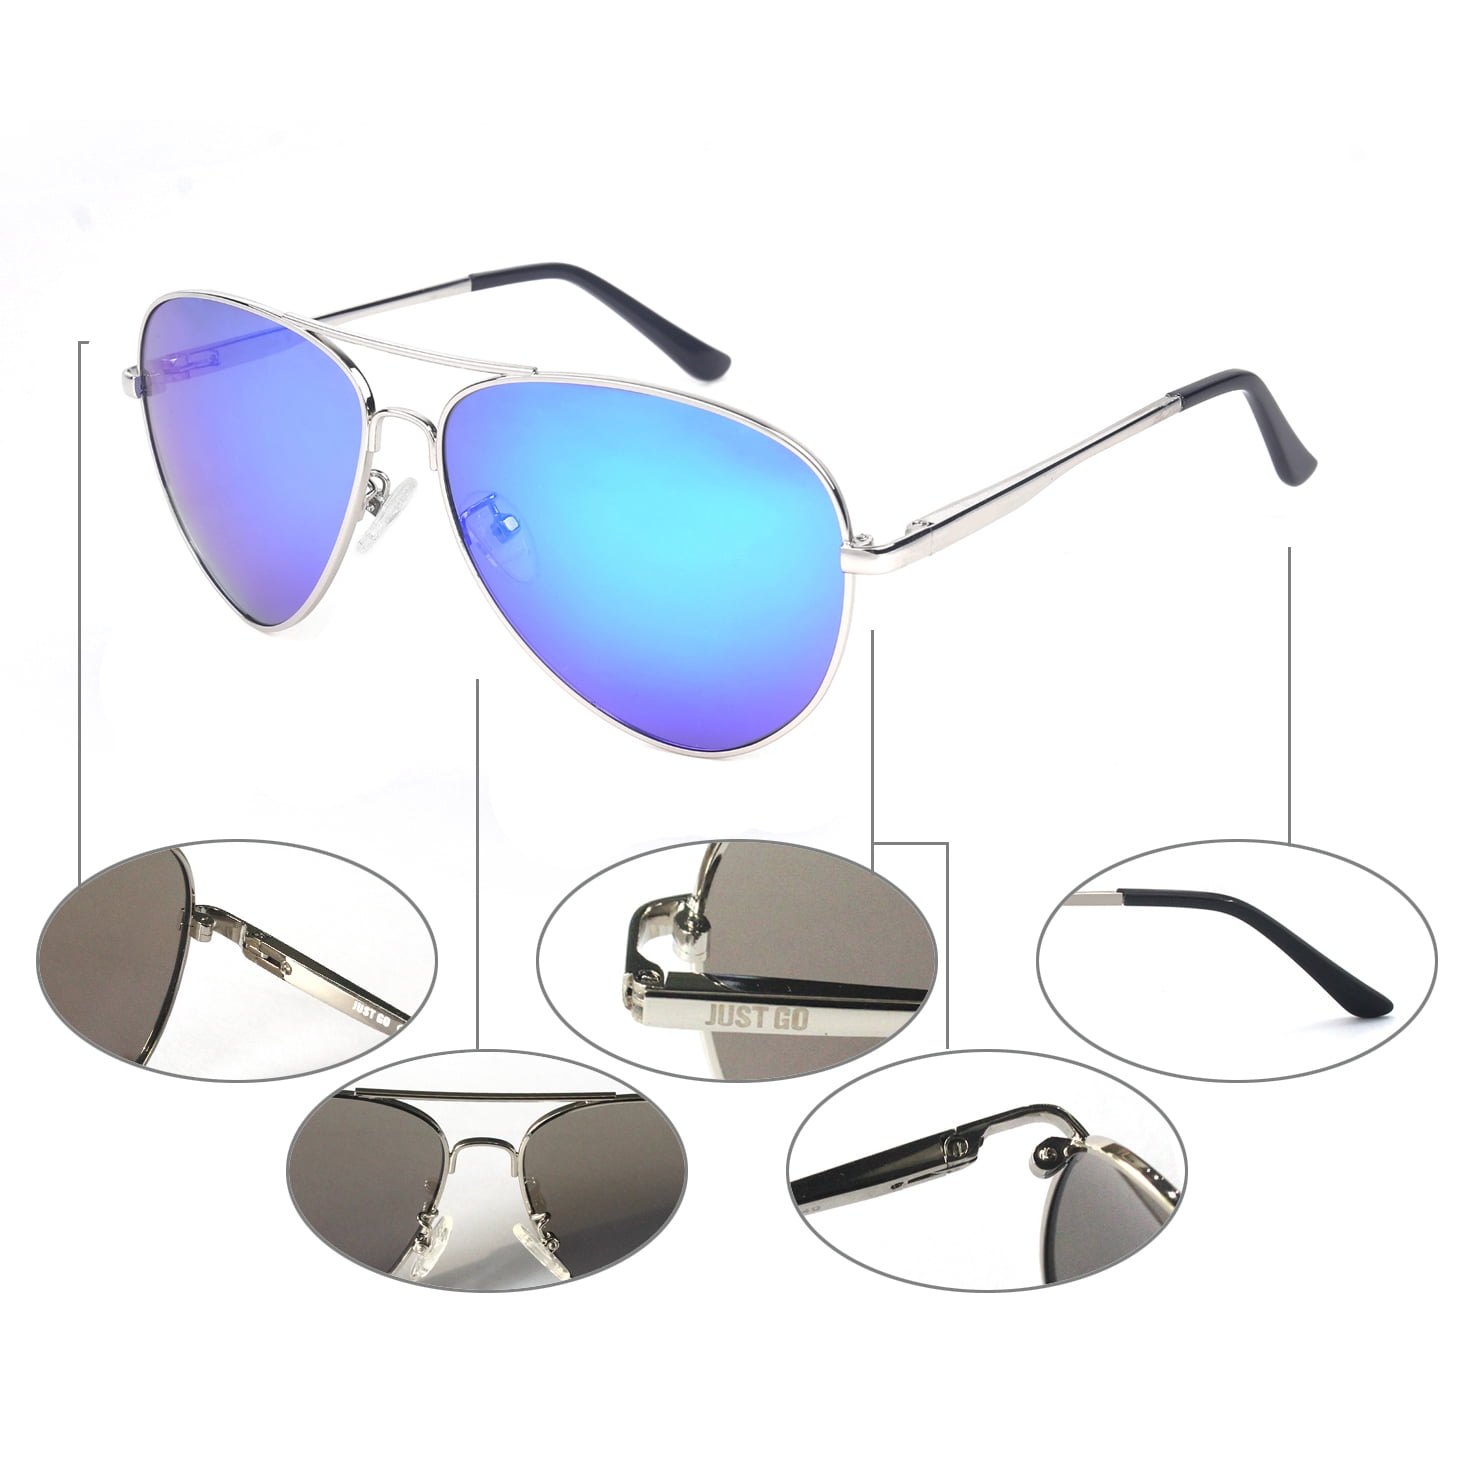 JUST GO Metal Polarized Vintage 100% UV Aviator Revo Sunglasses Matte Case, Style Lenses, Blue Frame with Protection, Gold